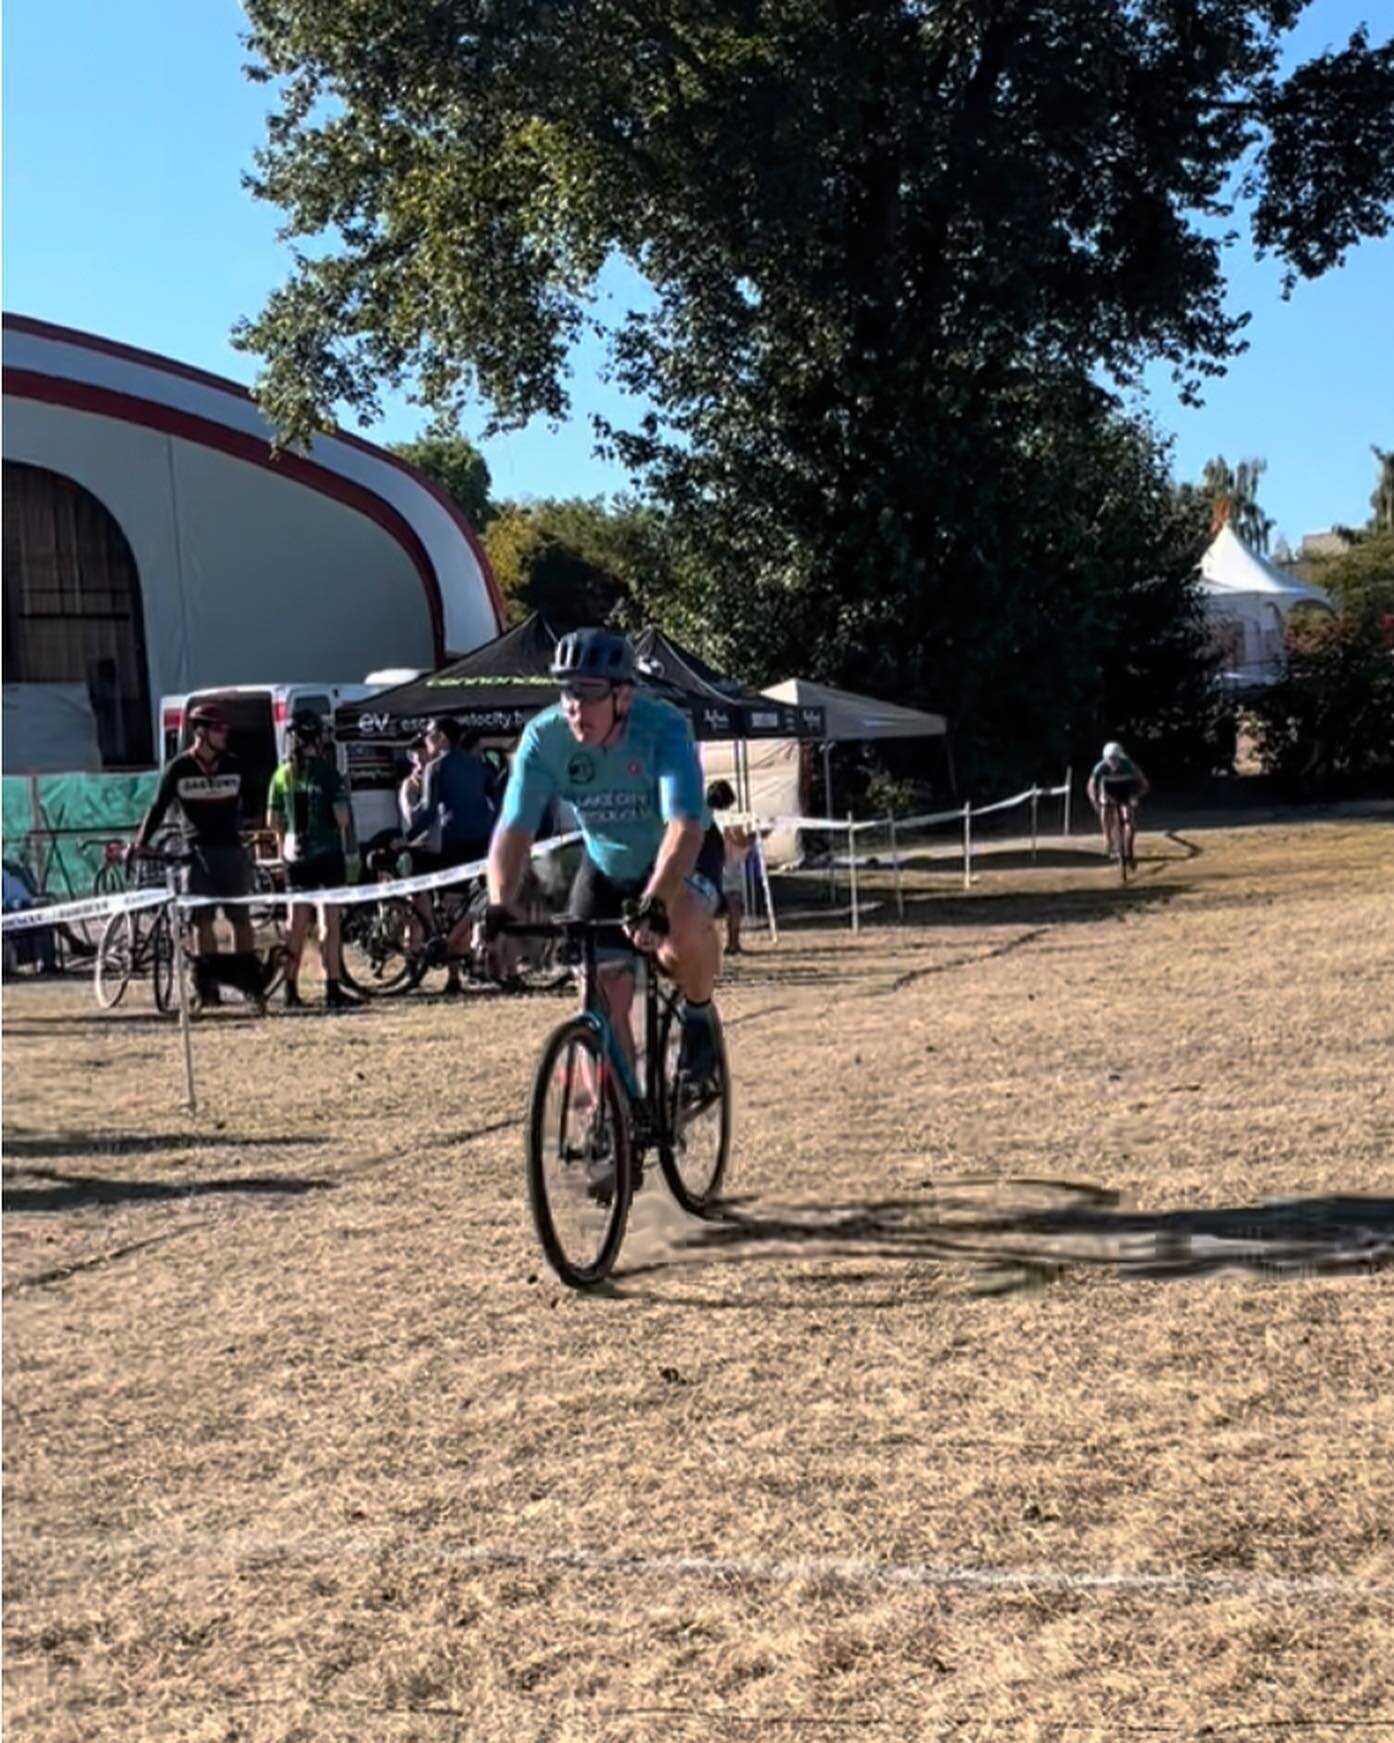 Lake City representing at the Vanier Park Cyclocross! Great atmosphere and a lot of fun! Worth giving it a try, if nothing more to get heckled (in good spirit) by the crowds! #cyclingbc #cyclocross #vaniercx #lakecitycycleclub